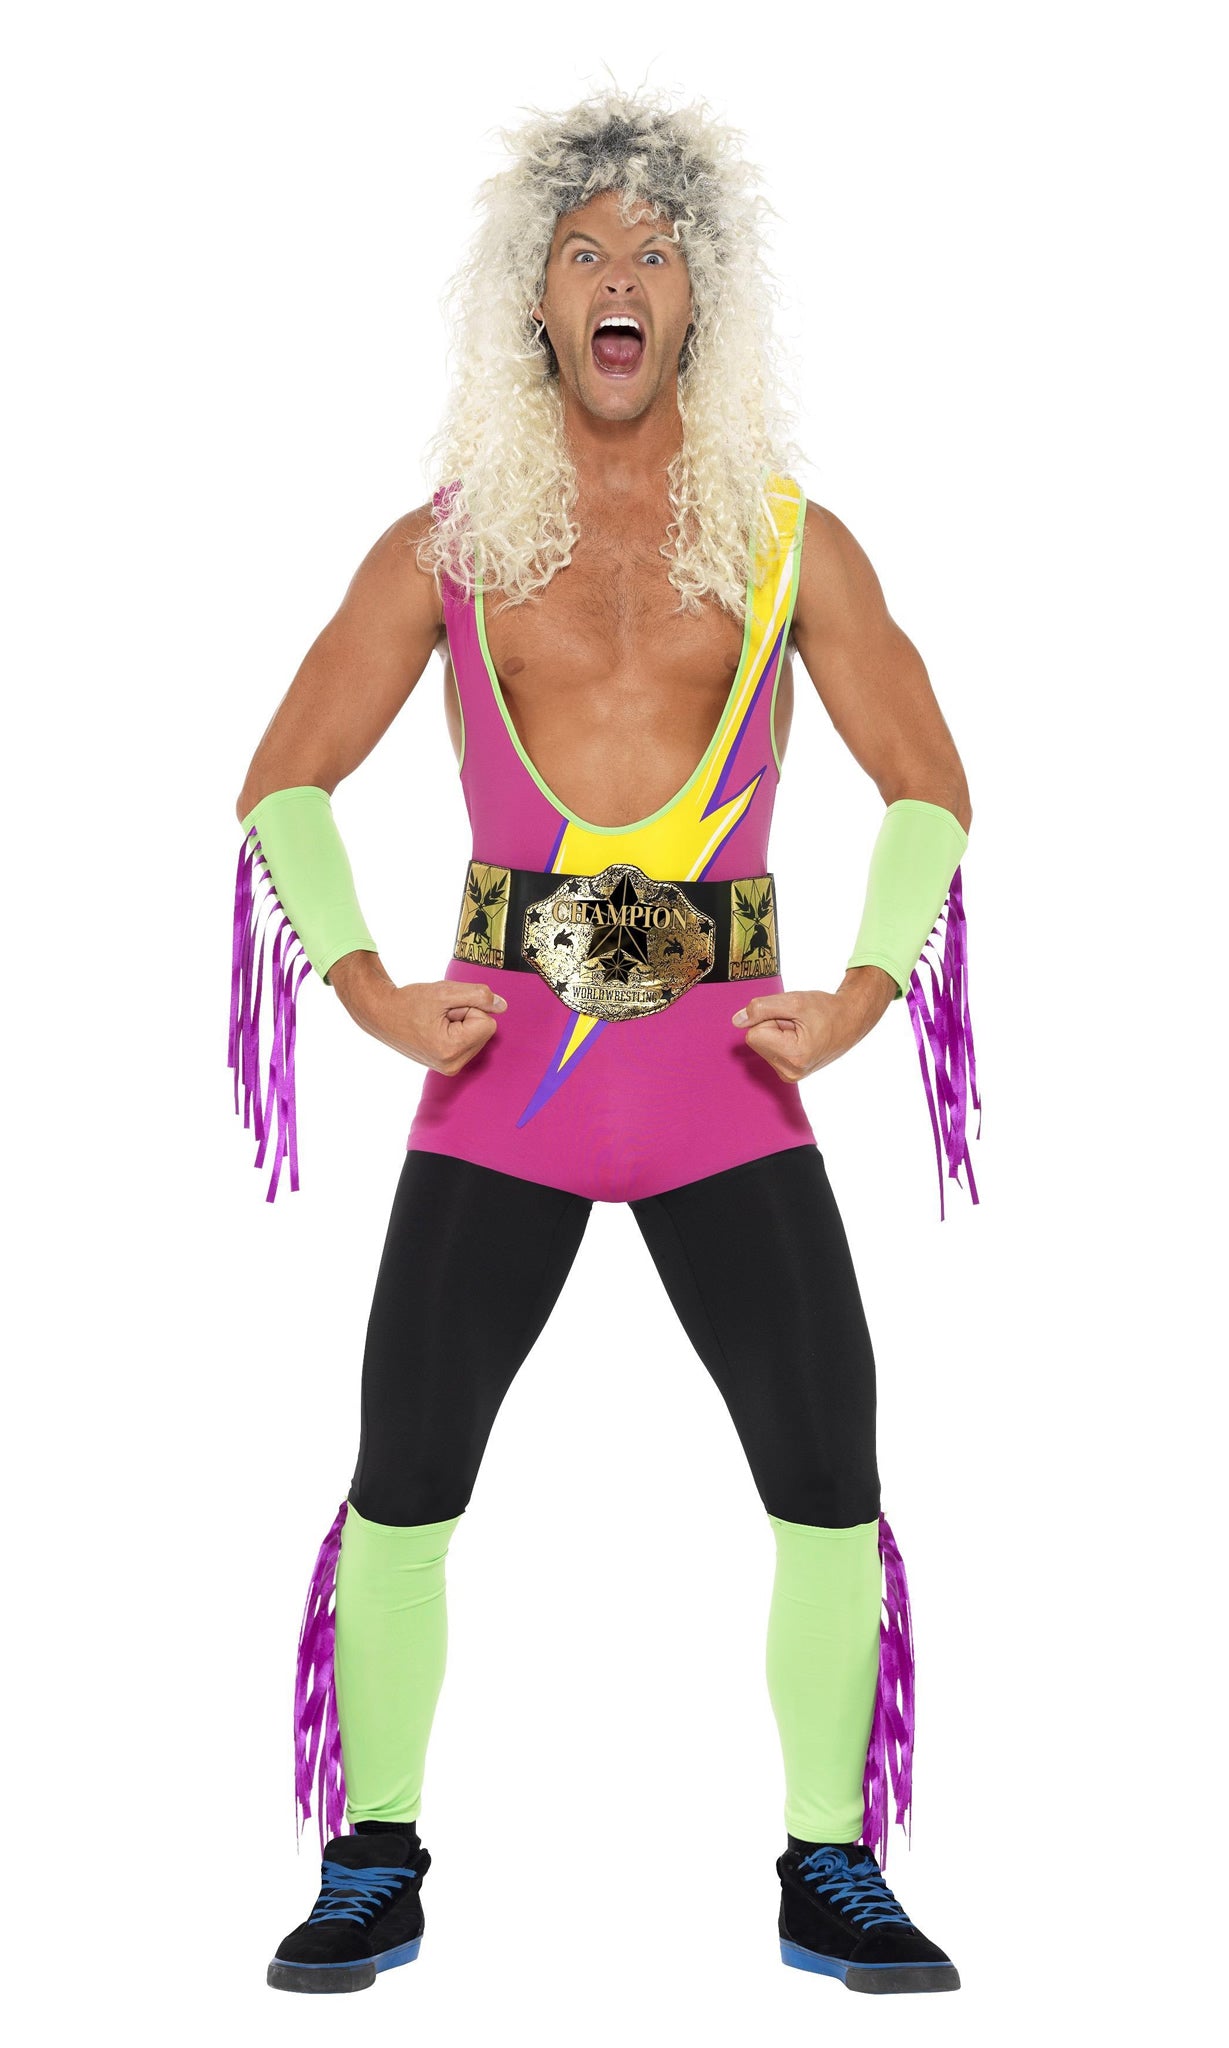 Green and pink wrestler jumpsuit with champion belt and arm and leg cuffs